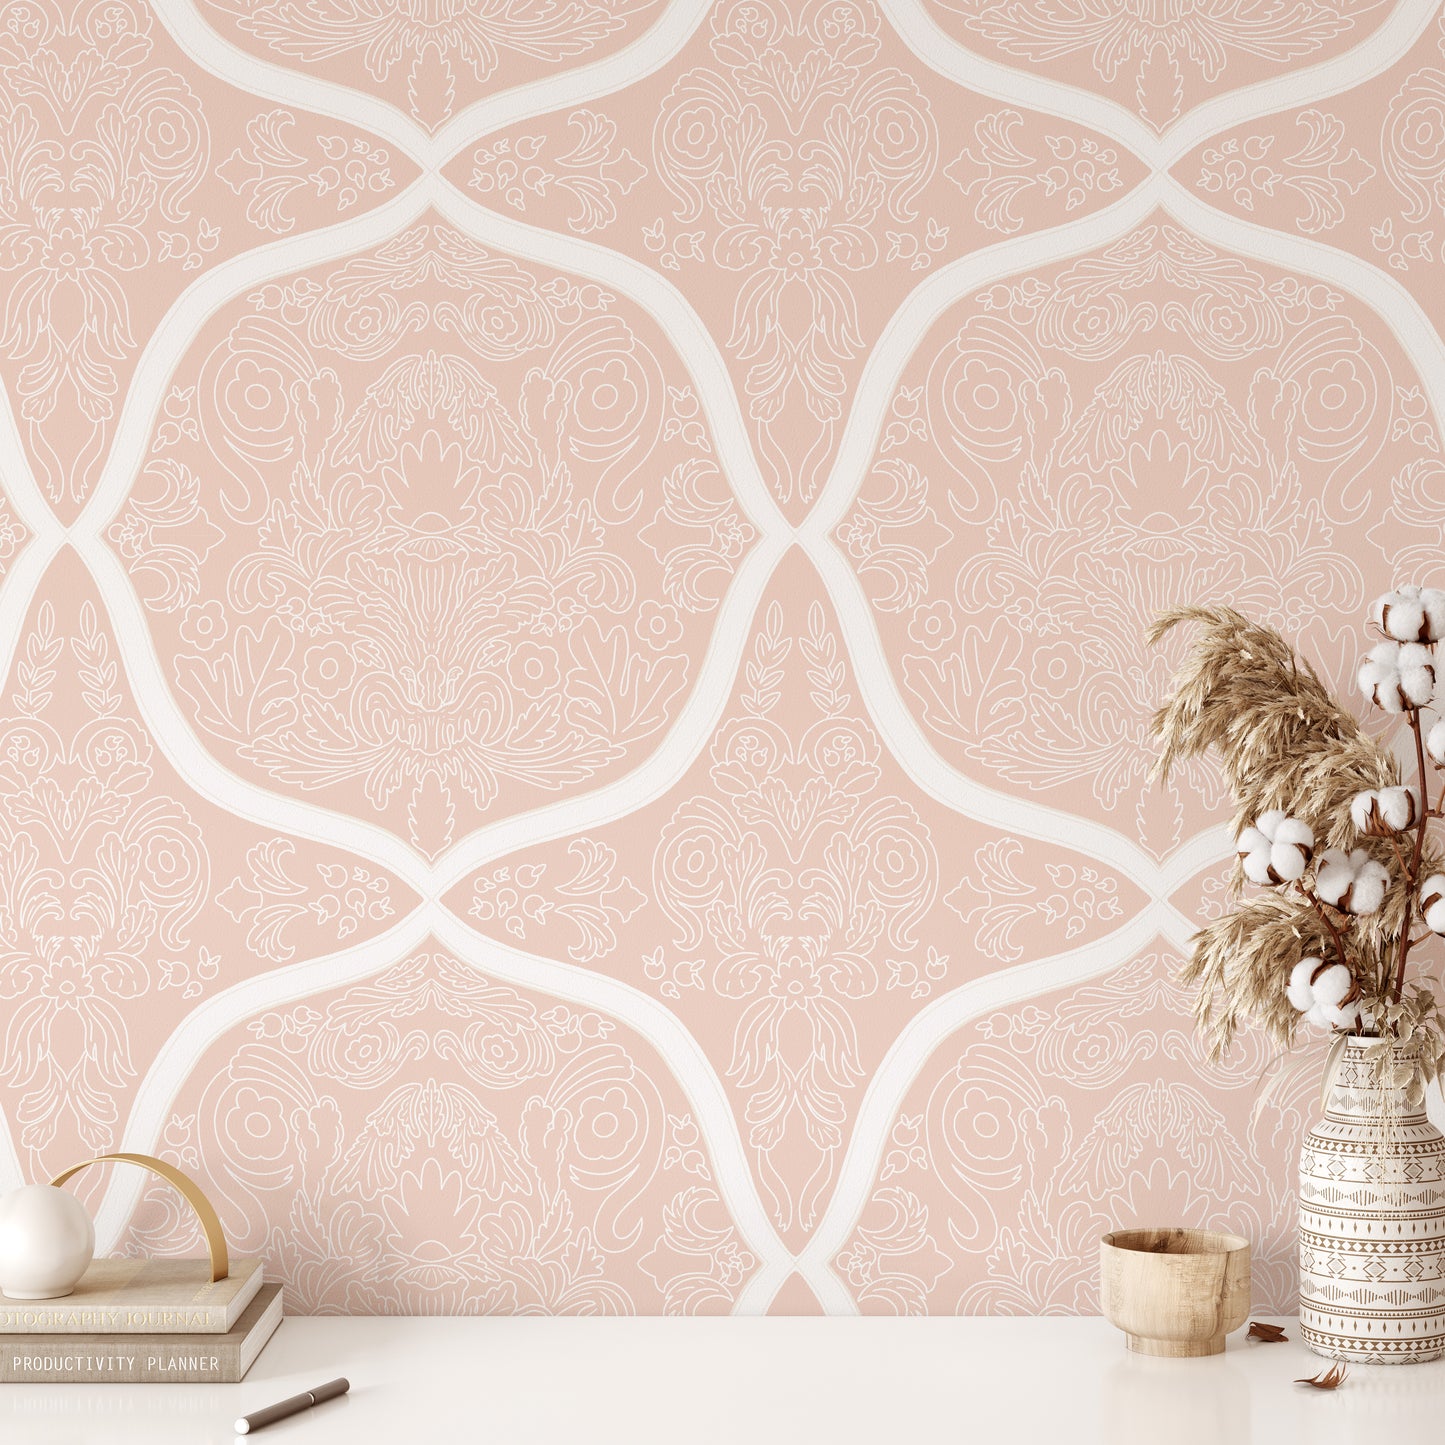 Transform any room into a luxurious retreat with our Italian Villa Wallpaper in Peach. The unique geometric design adds a touch of sophistication shown in a full size image.